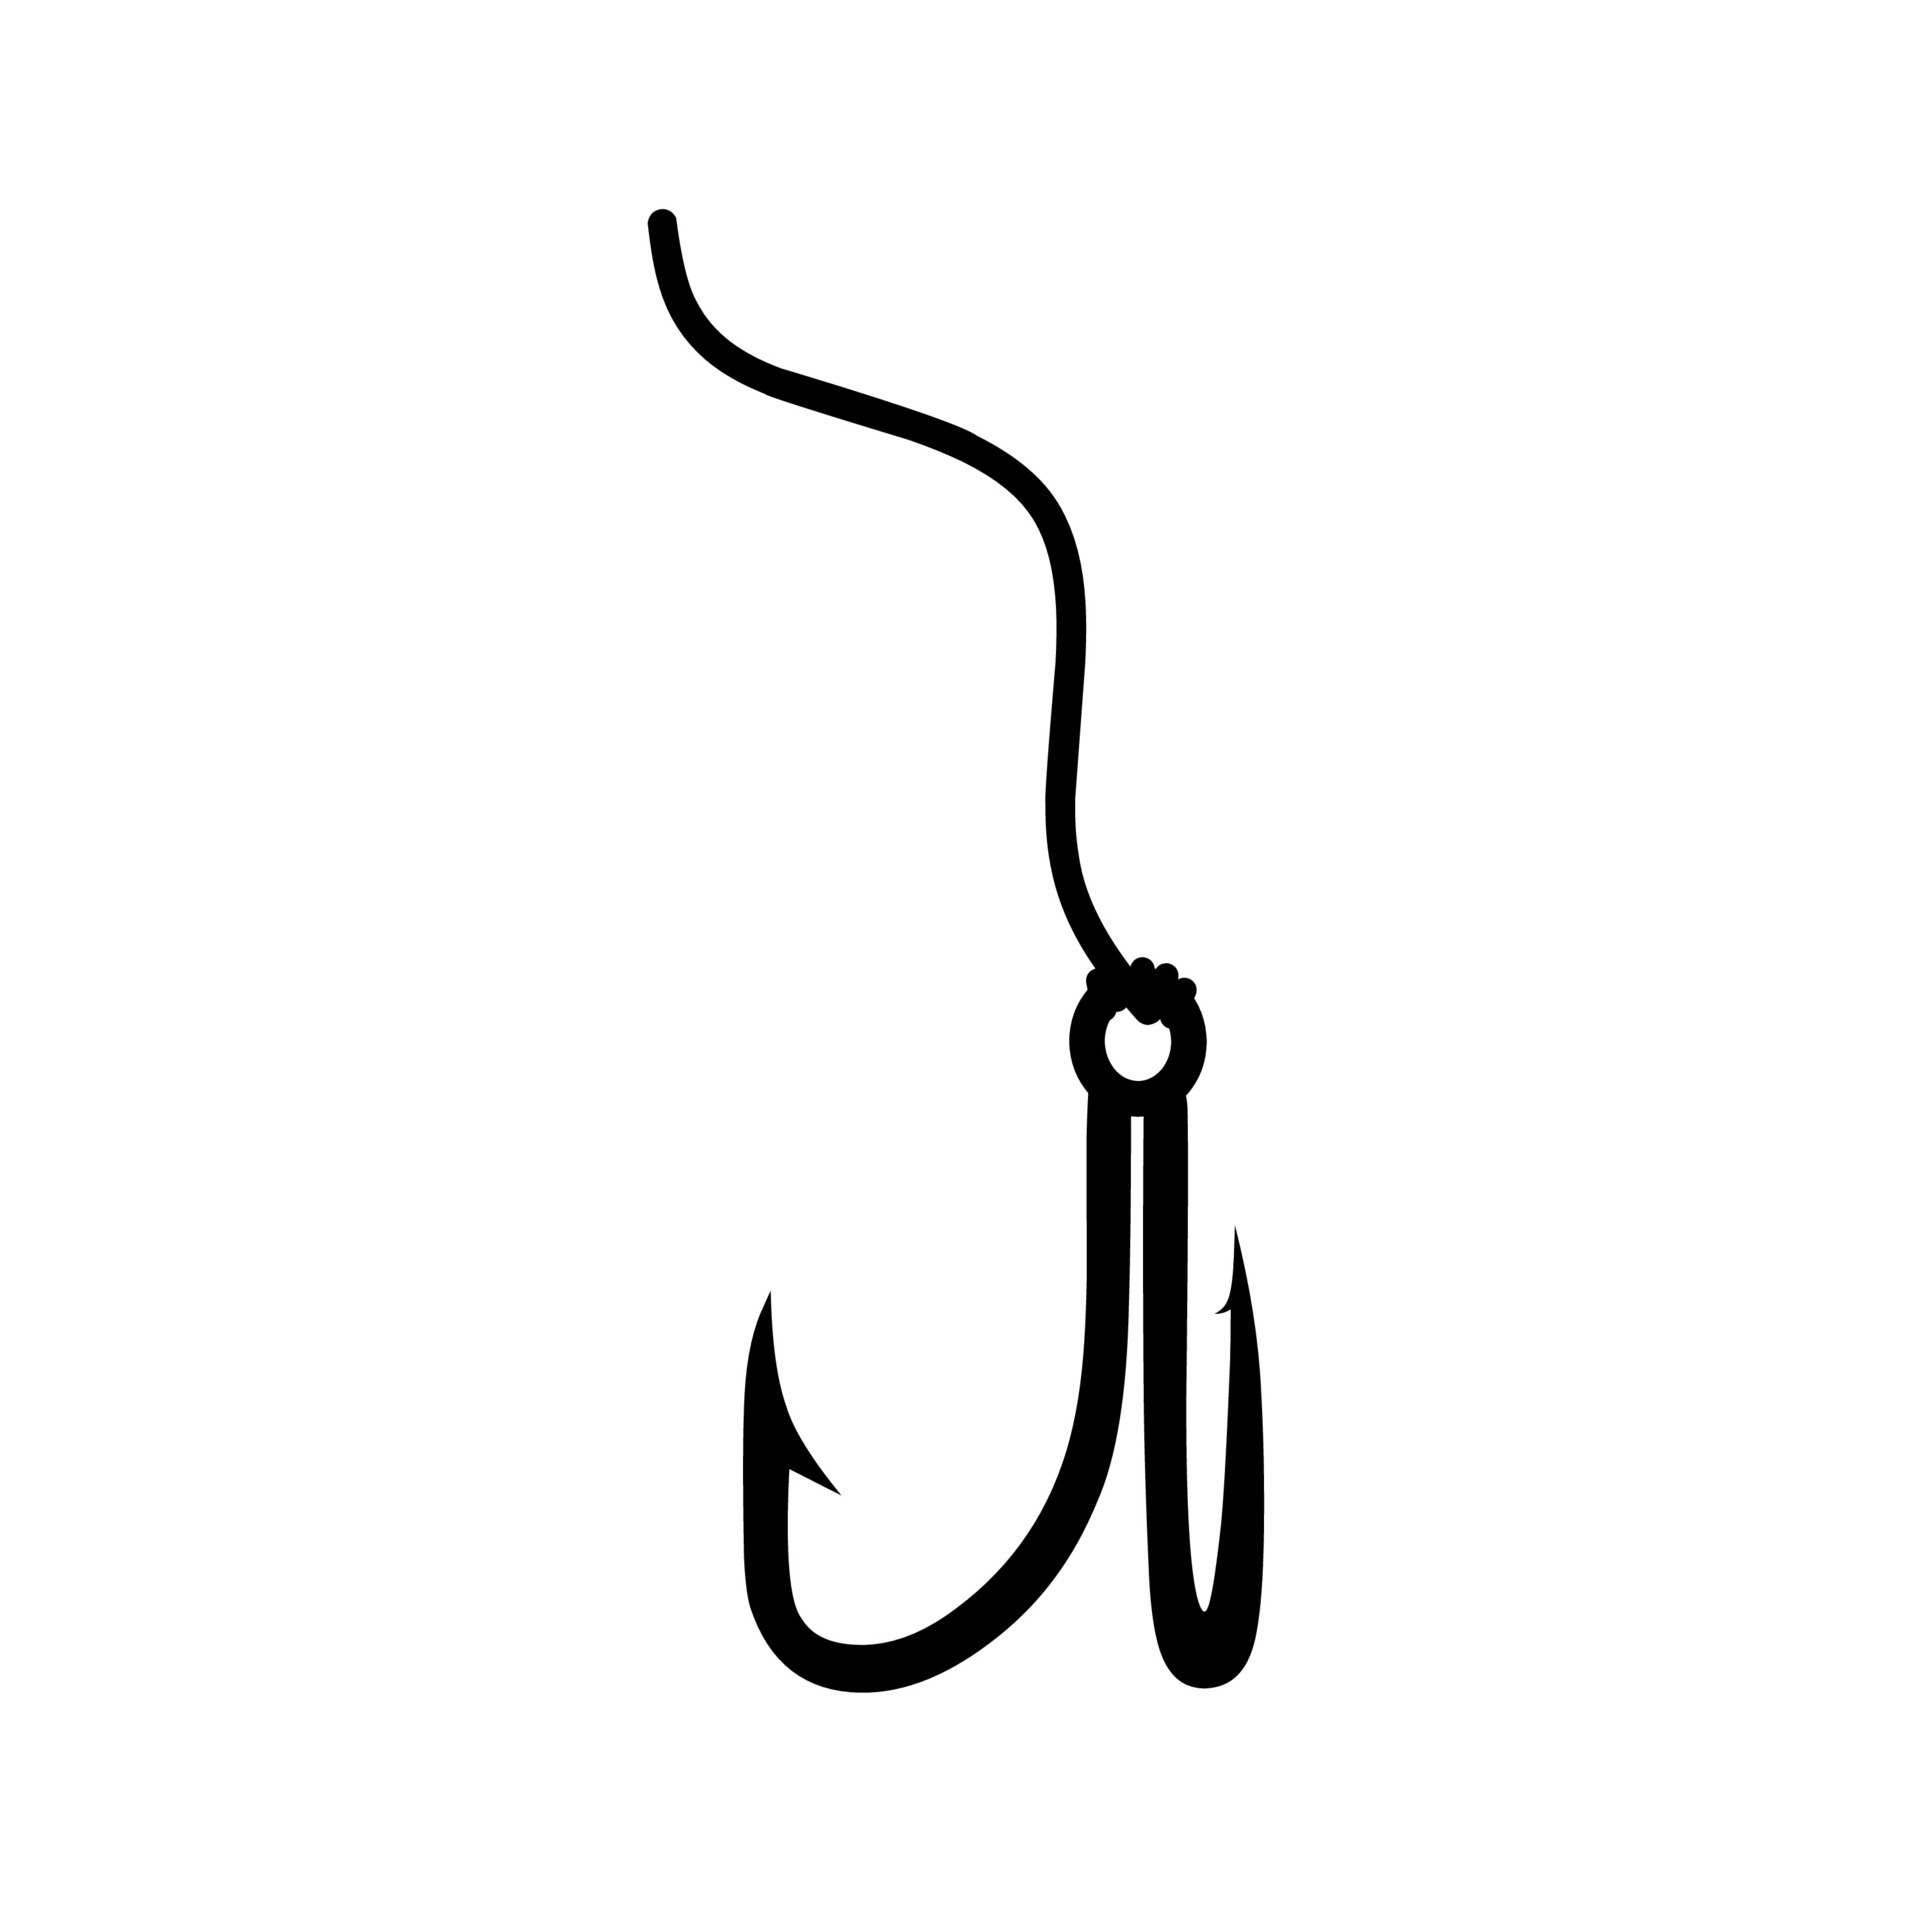 Silhouette of fishing hook with rope on white background. Fish